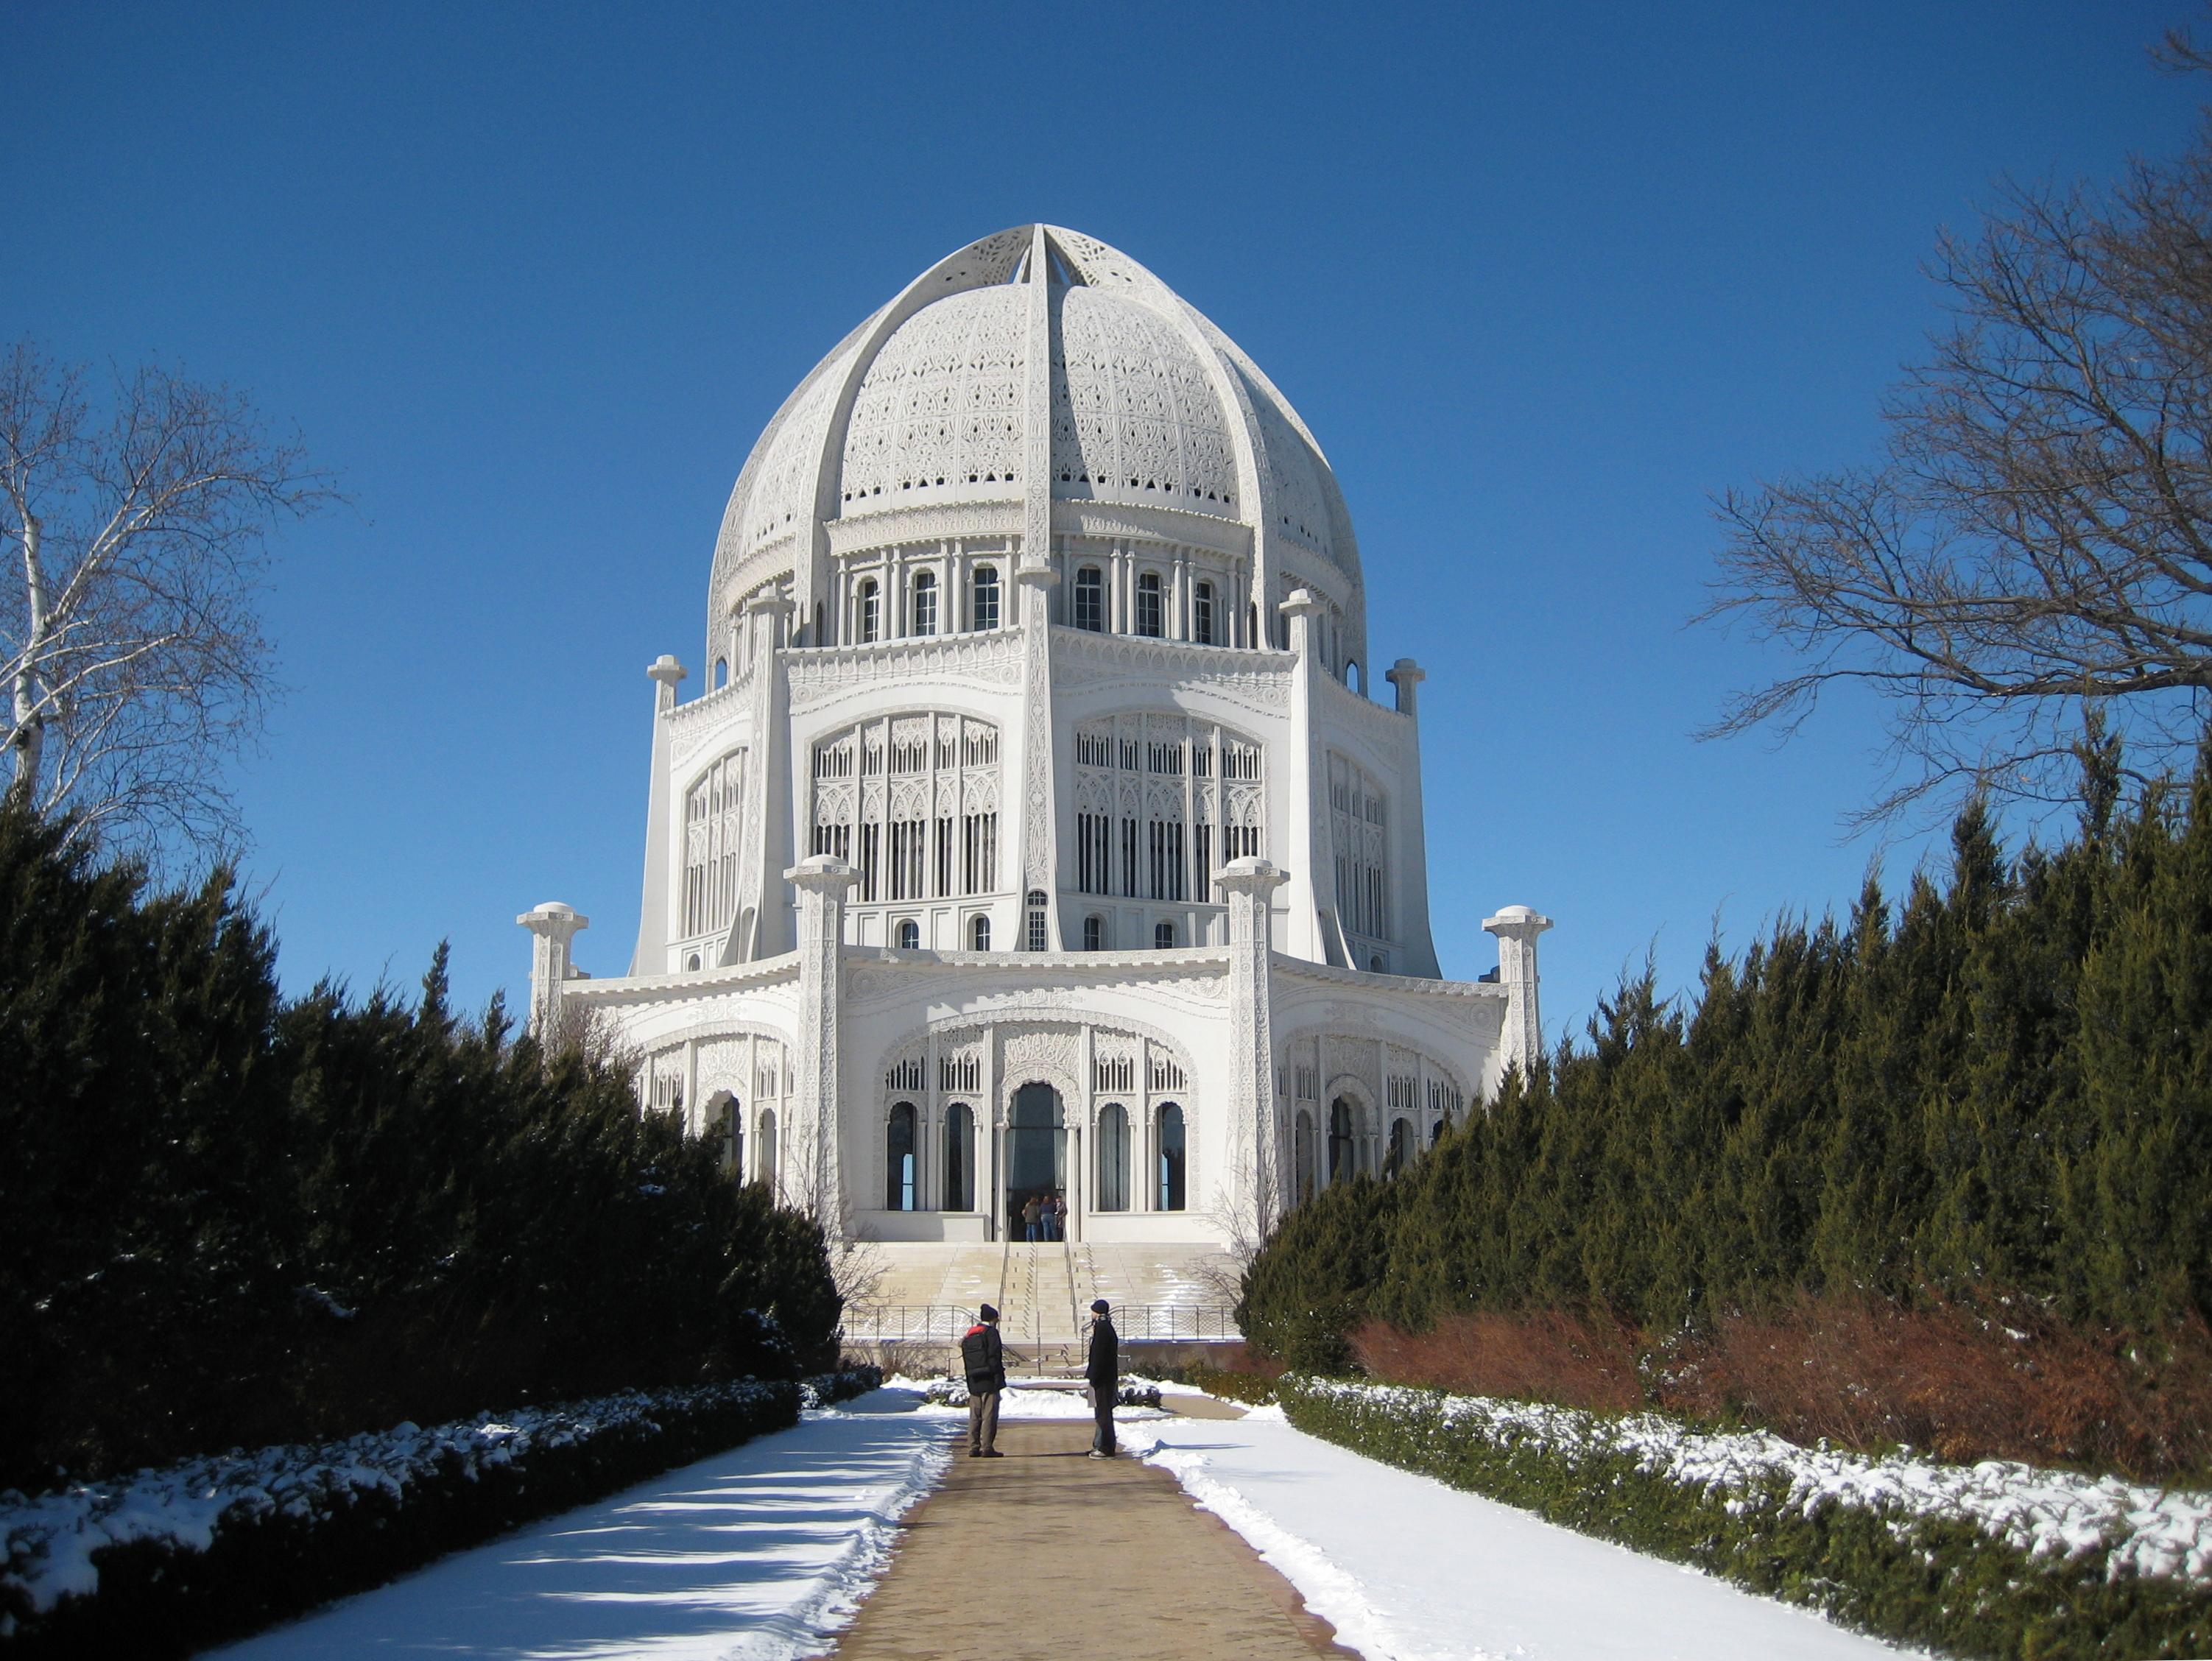 Cover image of this place Baha'i Temple